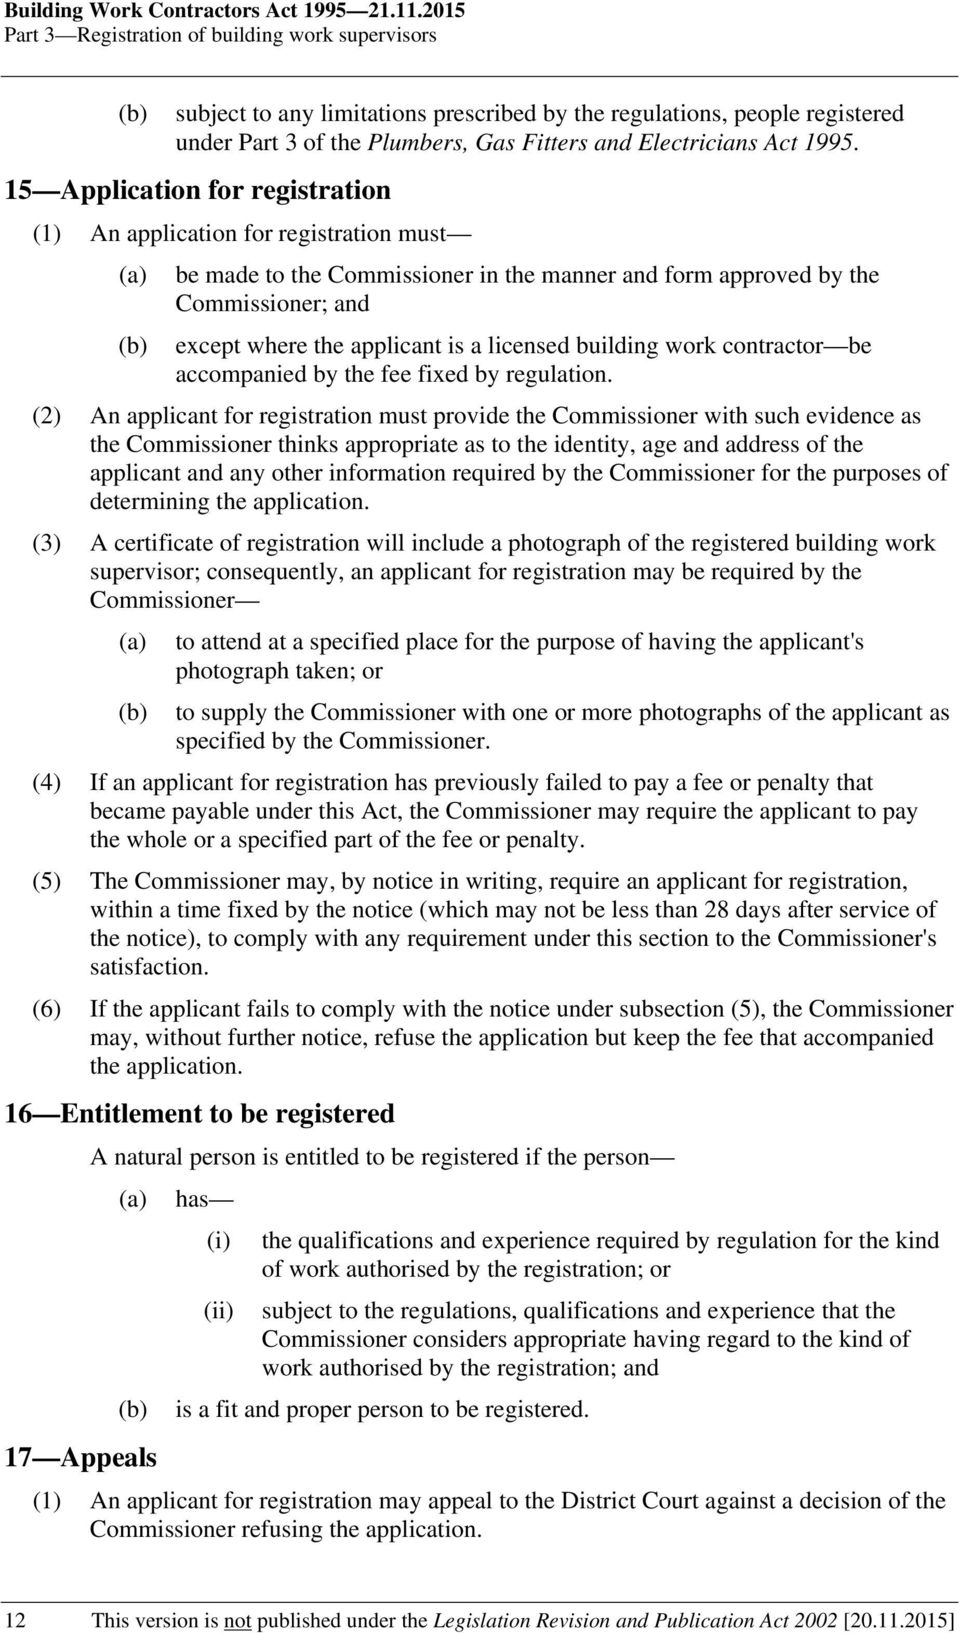 15 Application for registration (1) An application for registration must be made to the Commissioner in the manner and form approved by the Commissioner; and except where the applicant is a licensed